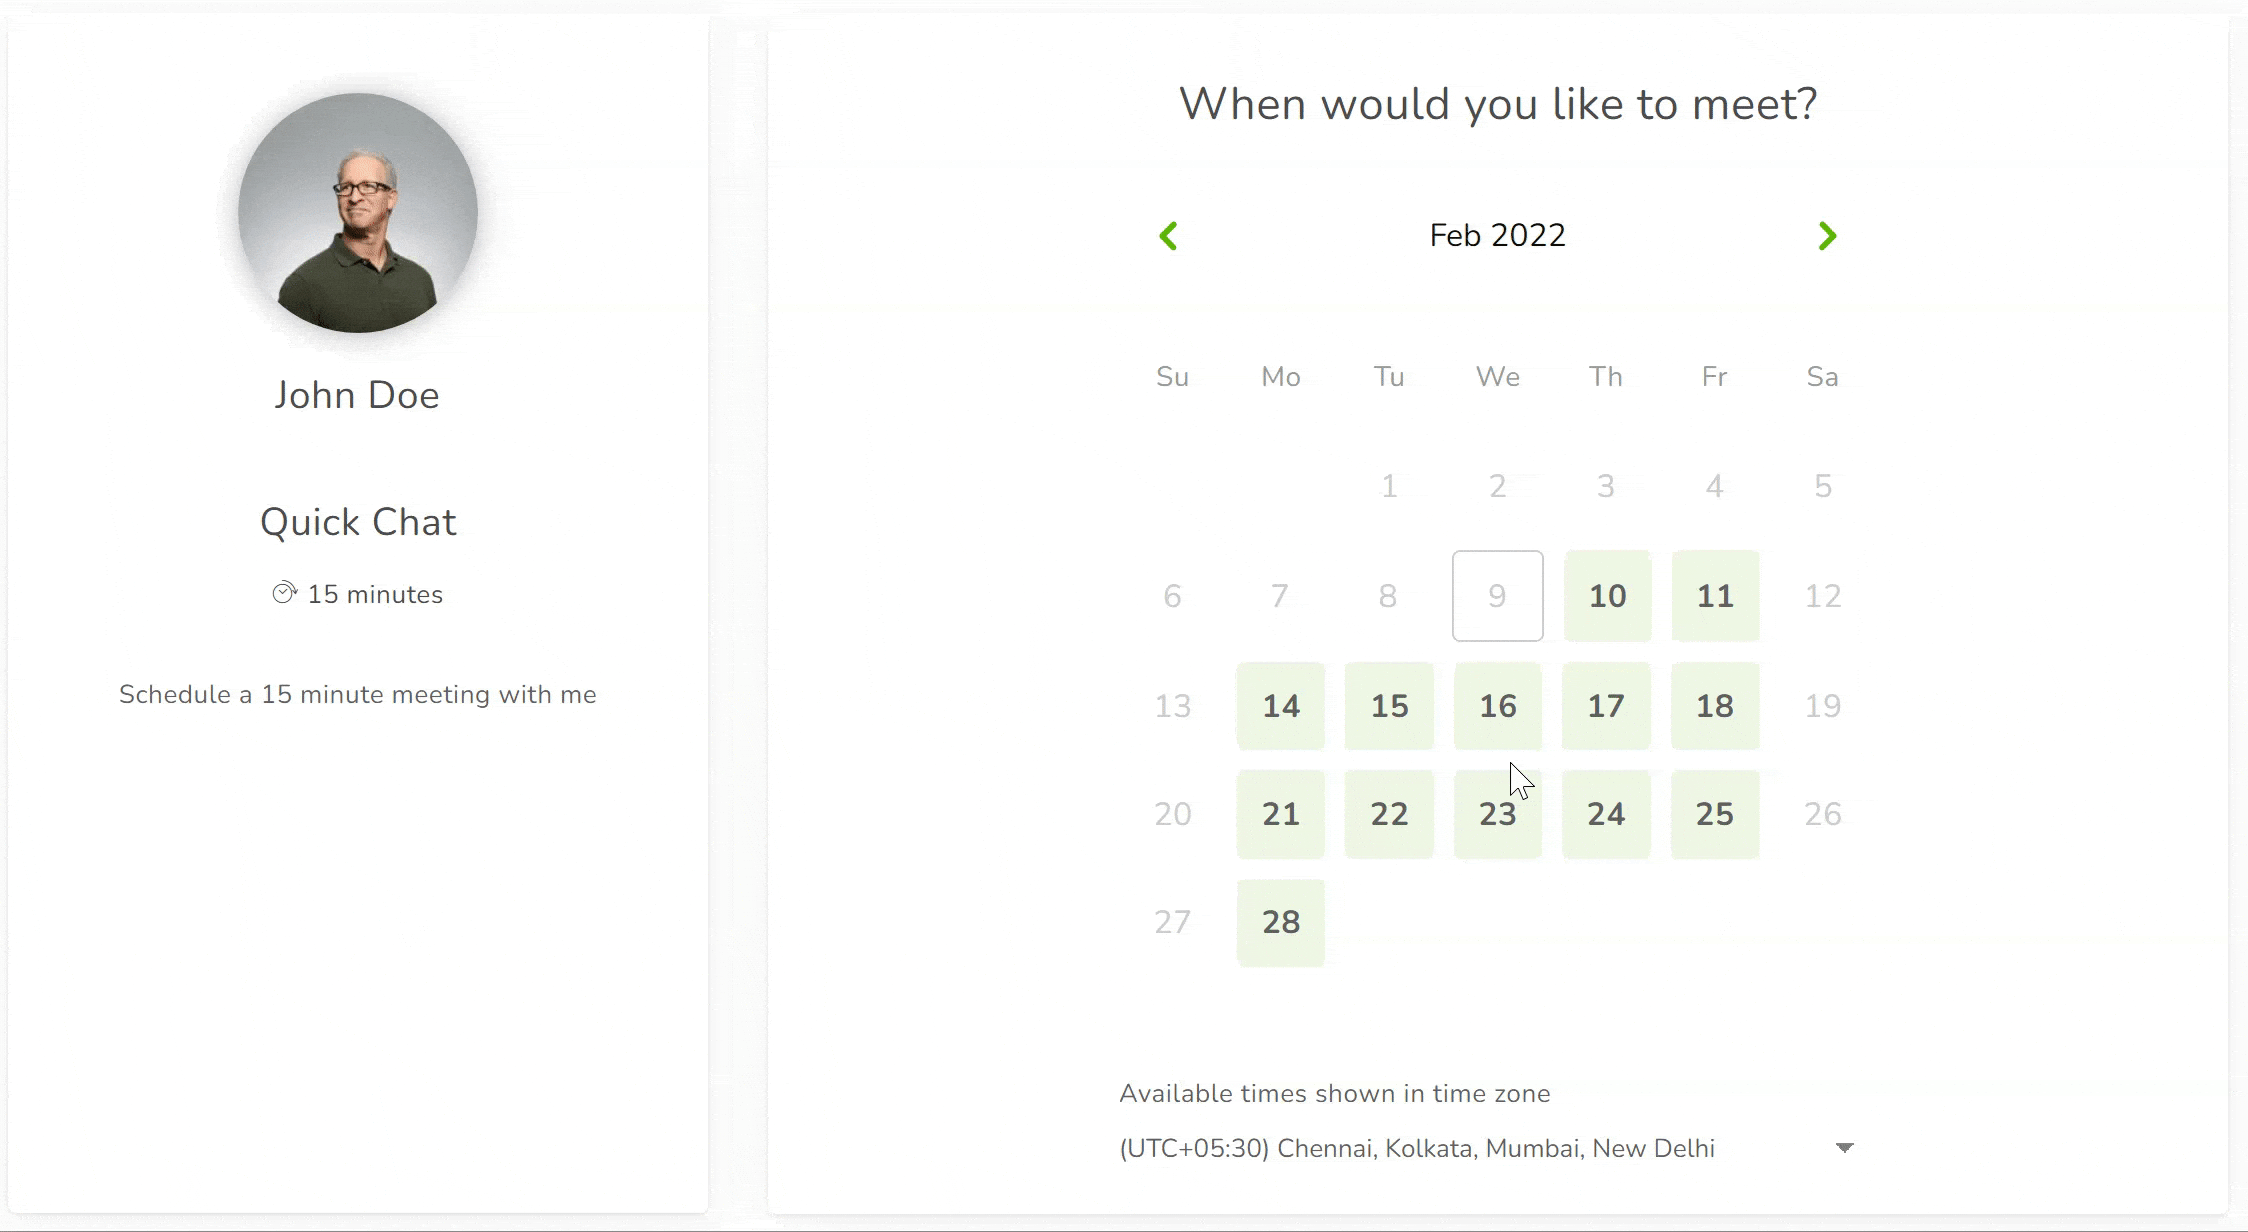 Easy Scheduling Experience